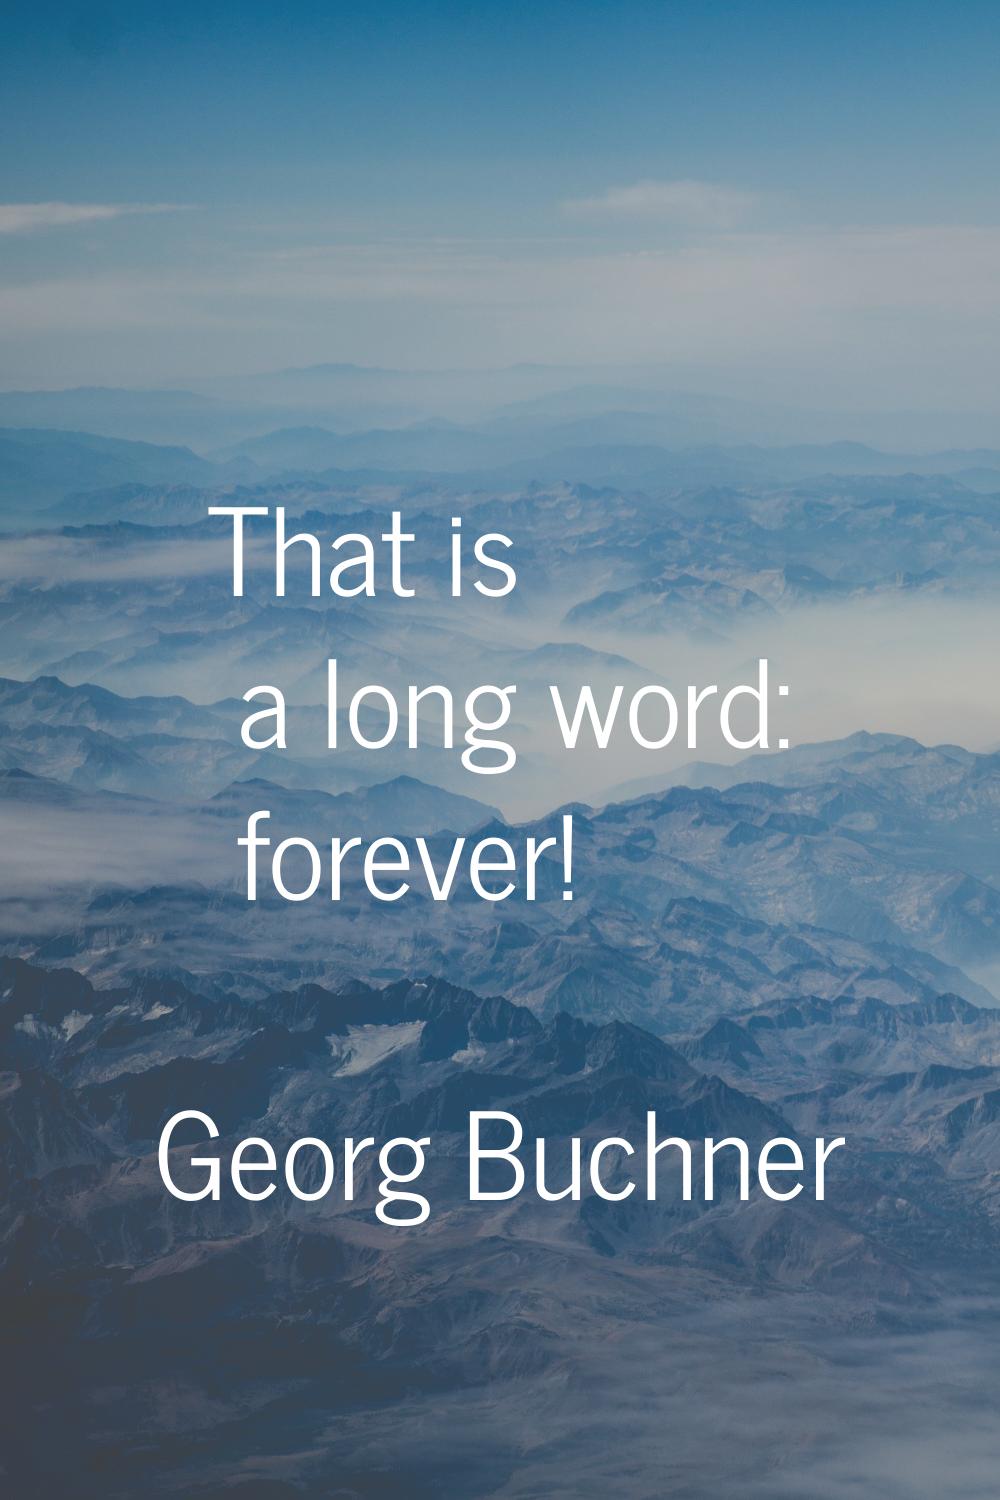 That is a long word: forever!